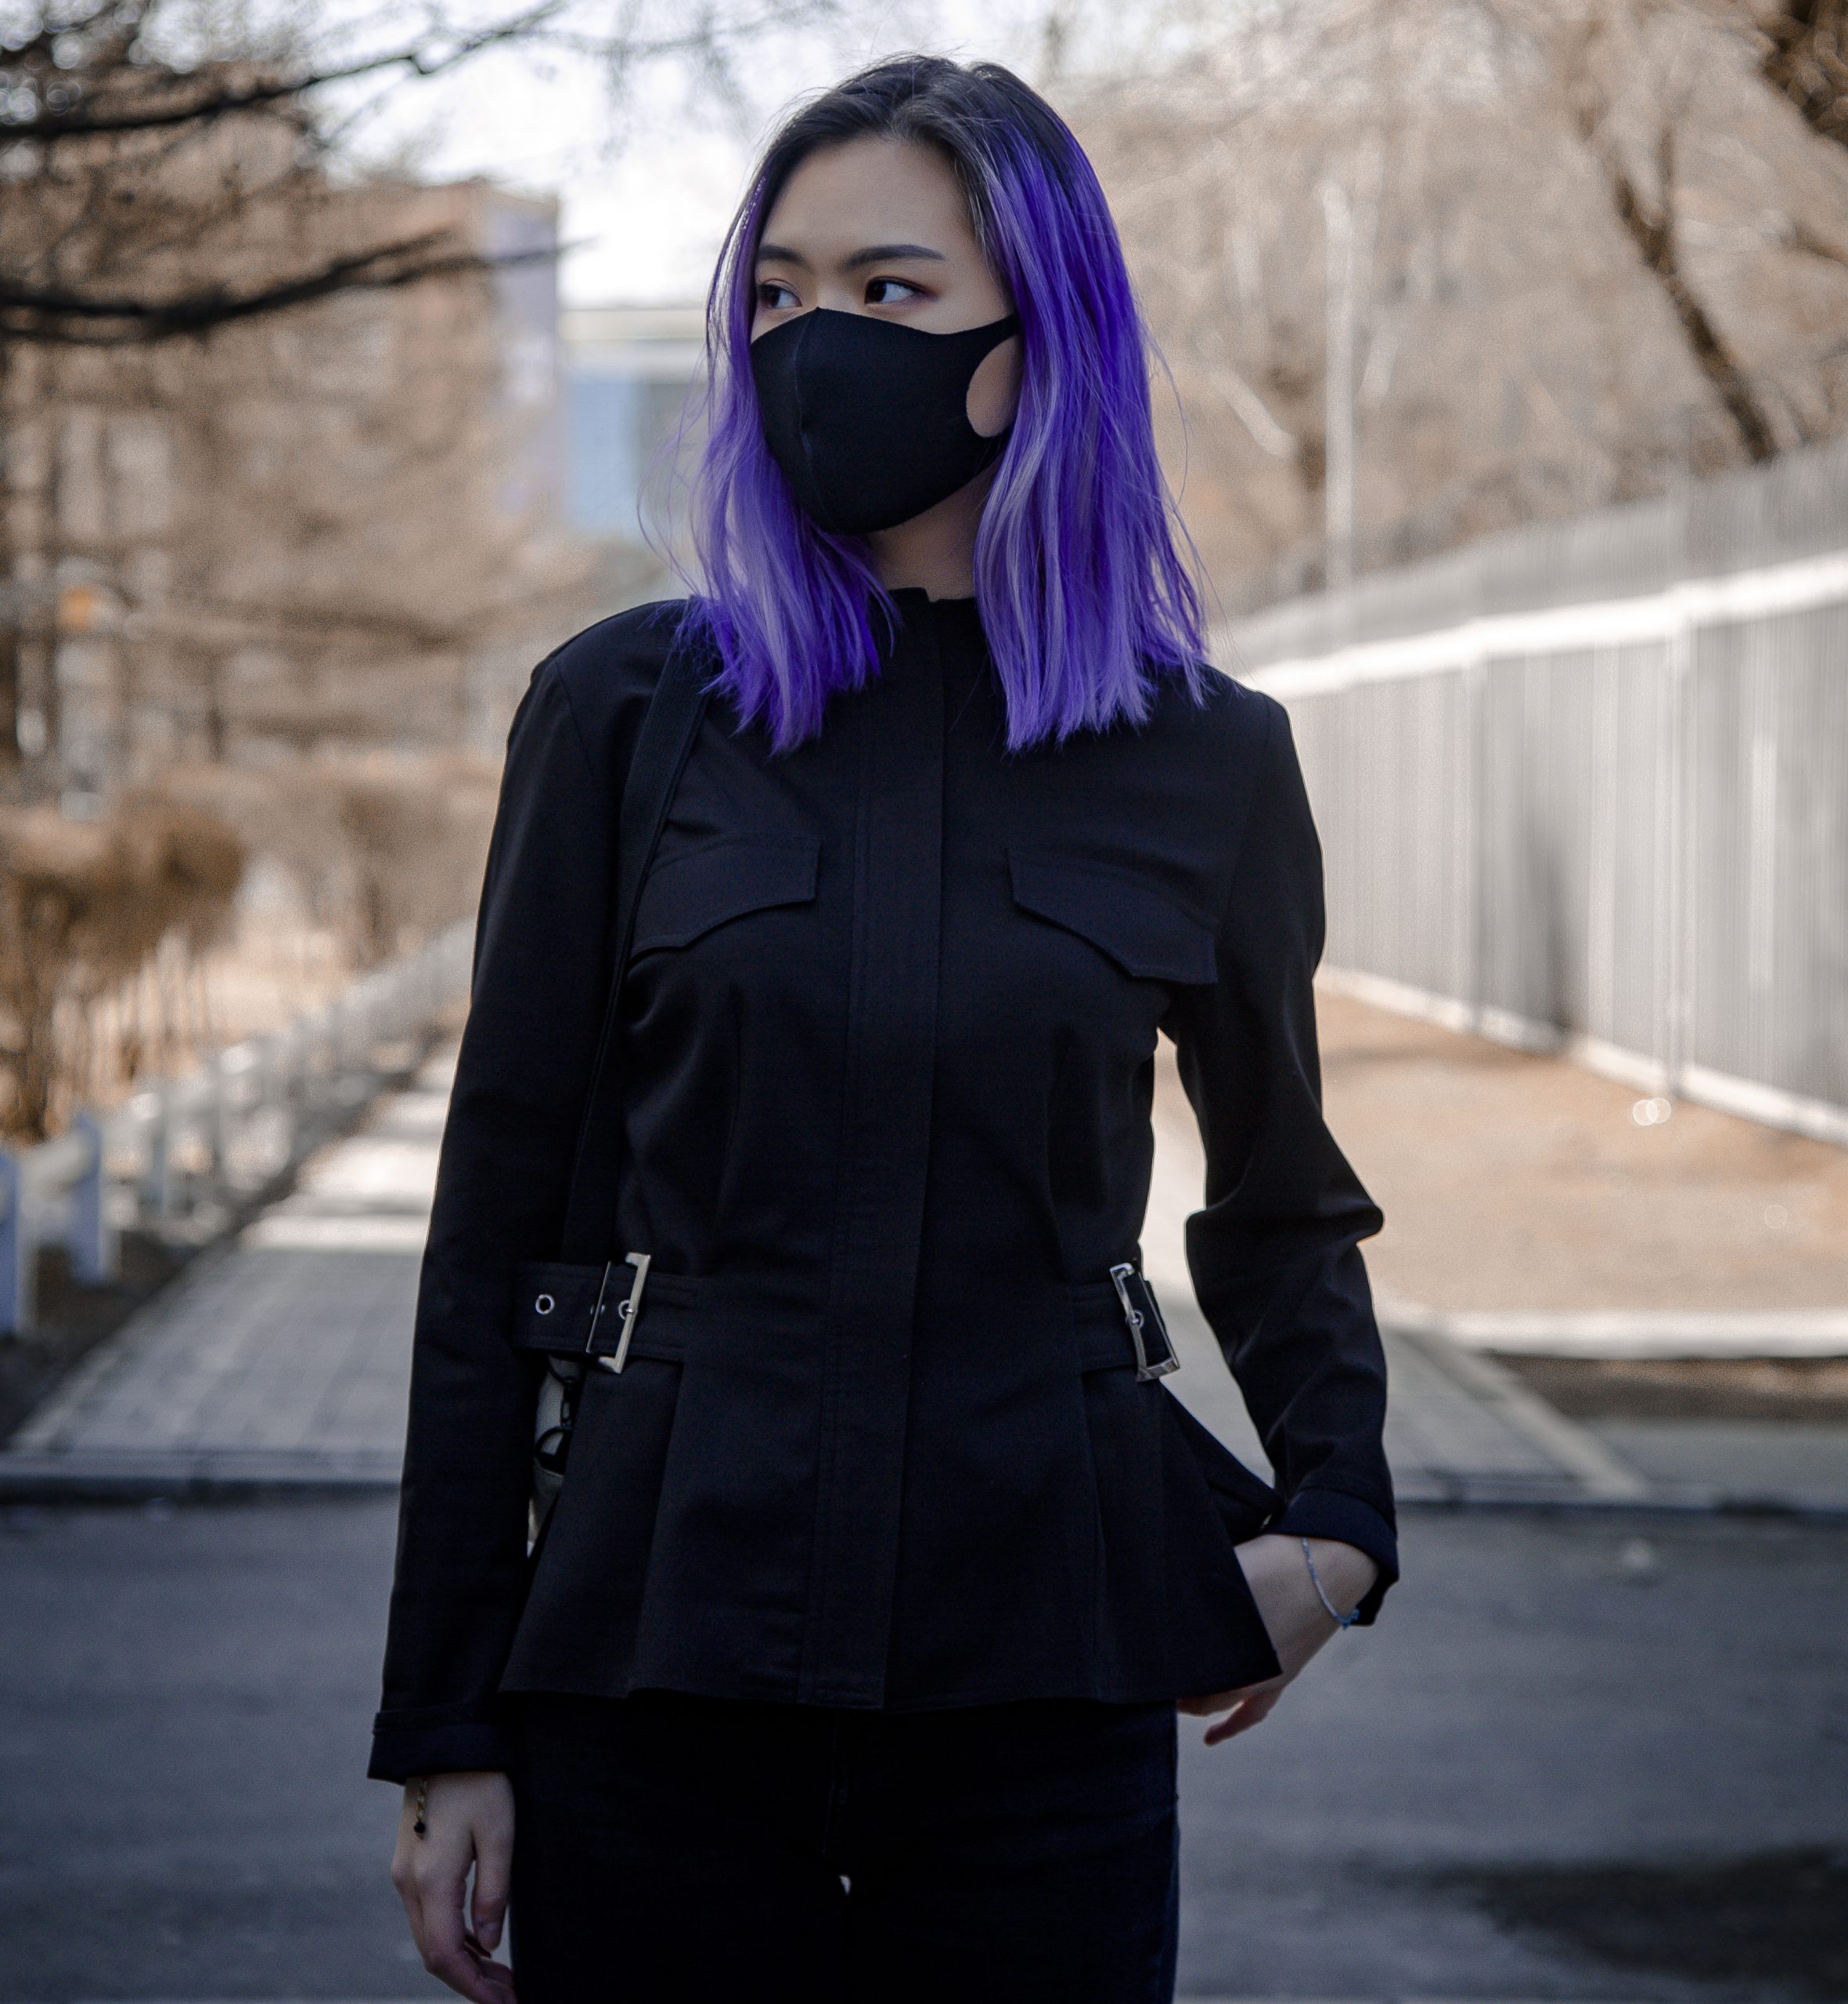 Woman with Purple Hair and Face Mask